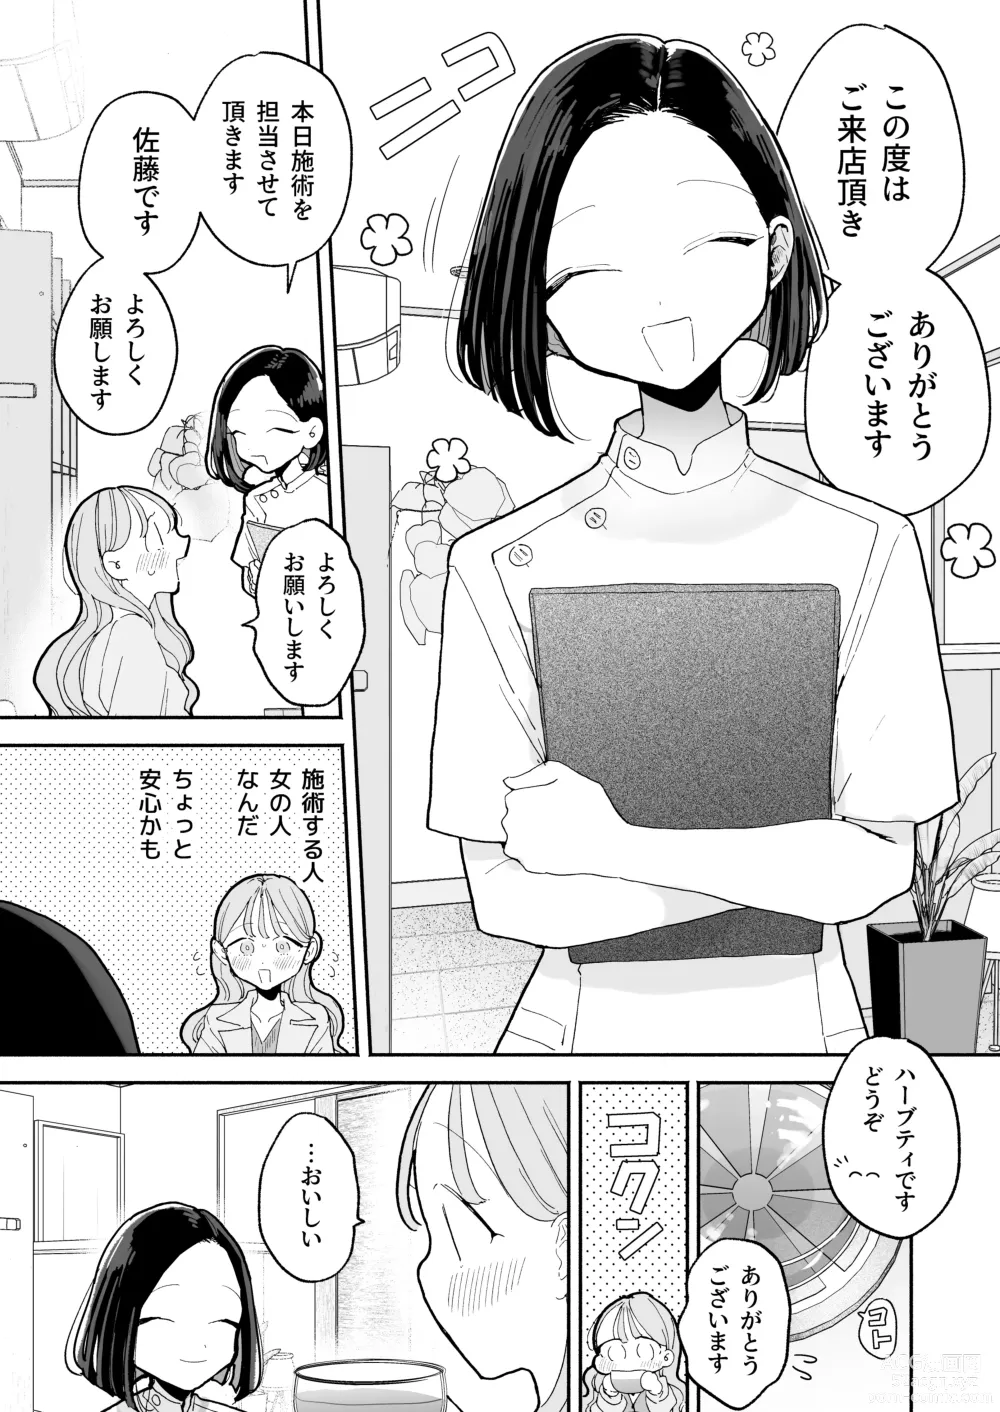 Page 4 of doujinshi Climax Reflex A story about a girl who becomes ◯◯ at an erotic massage shop in front of the station